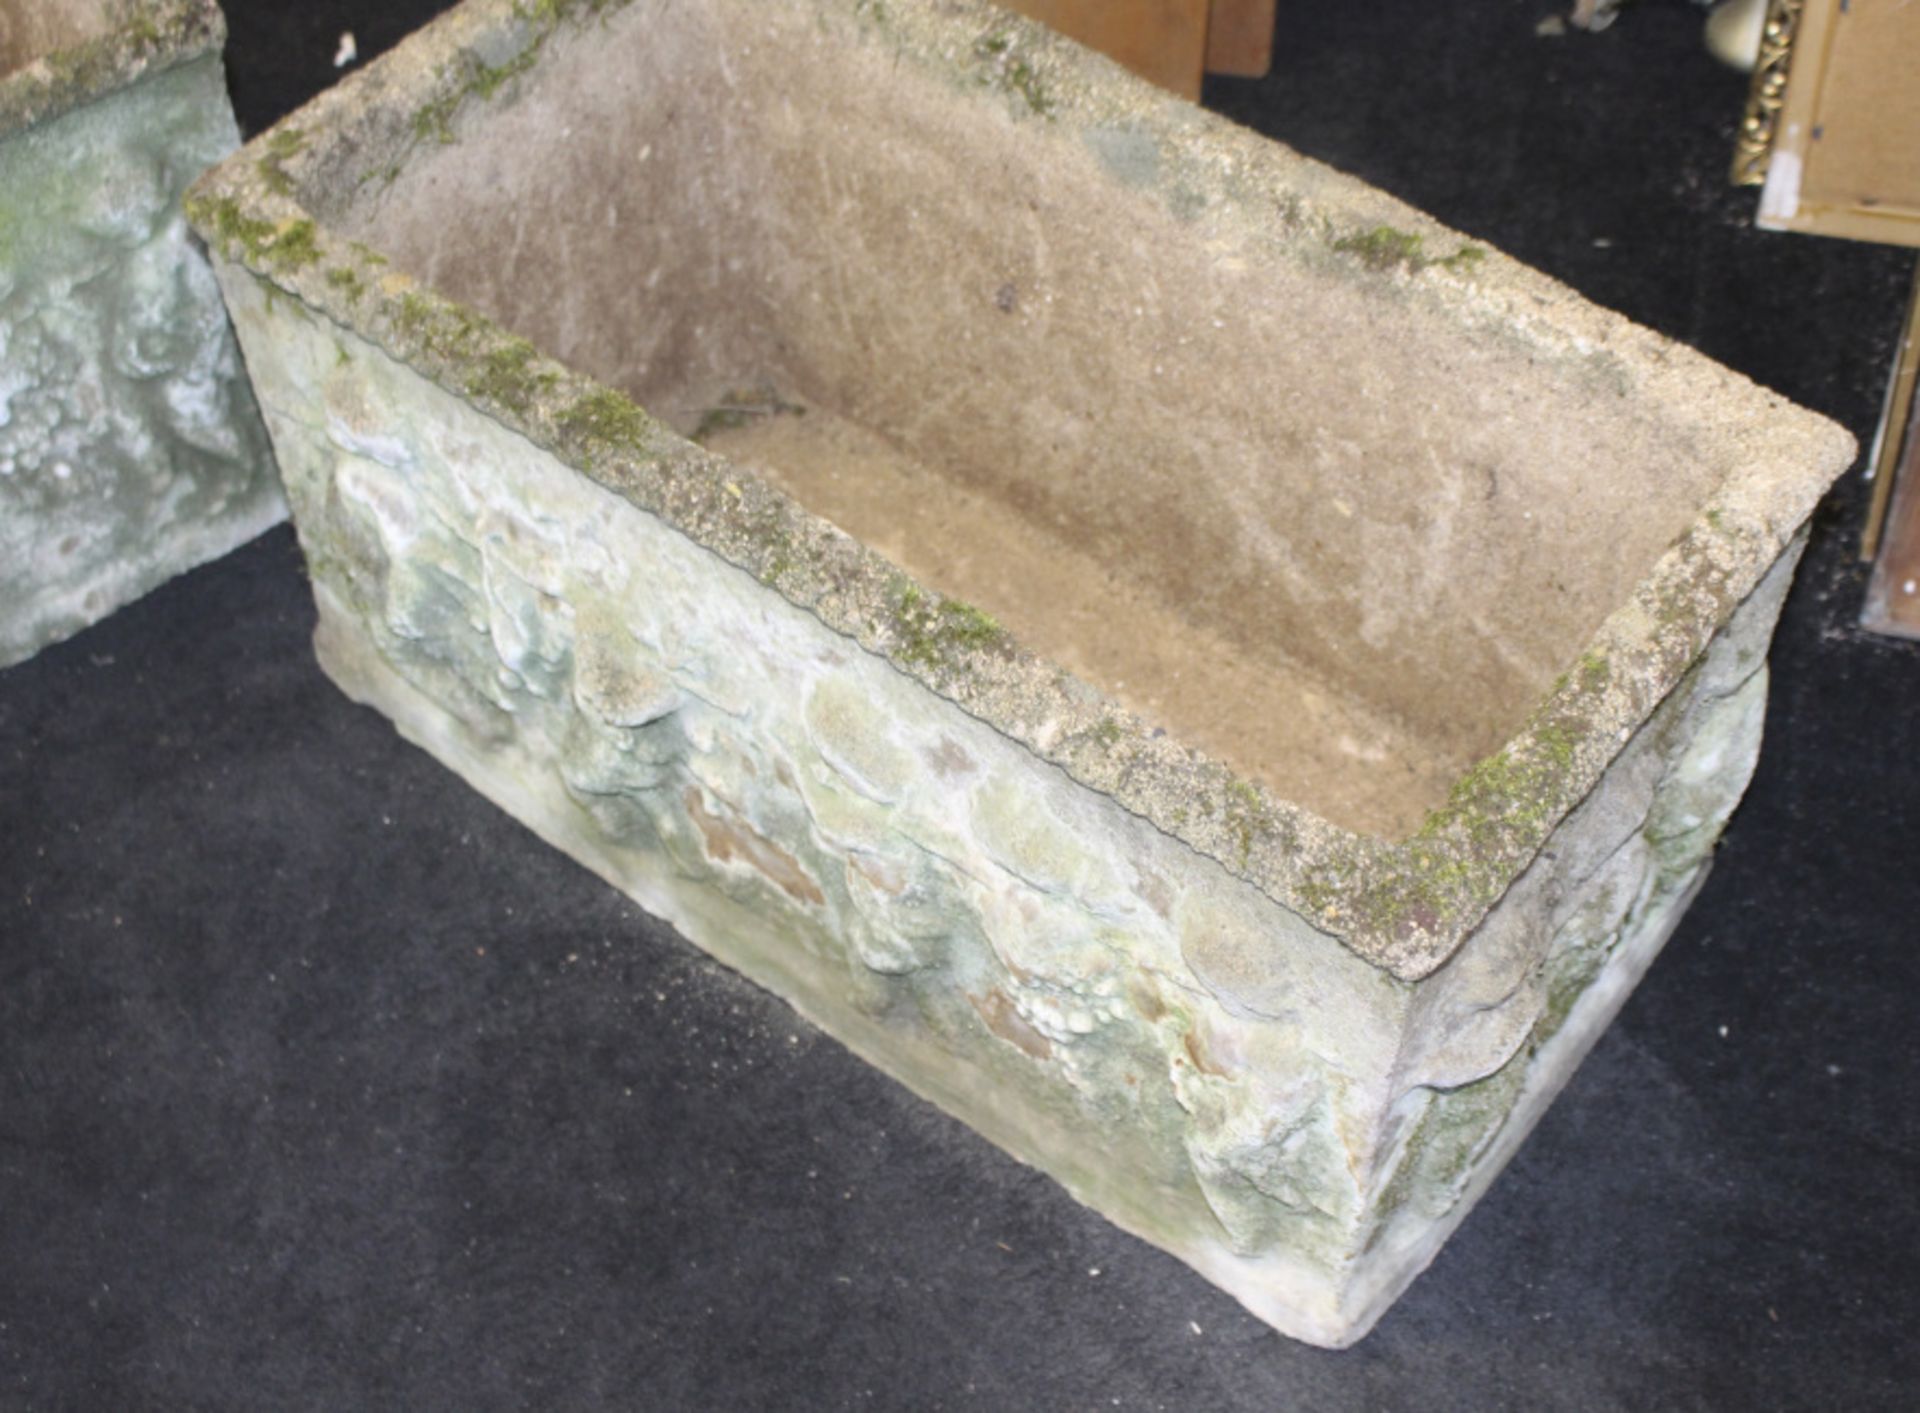 Pair of Old Reconstituted Cherubic Garden Planter Troughs - Image 3 of 4